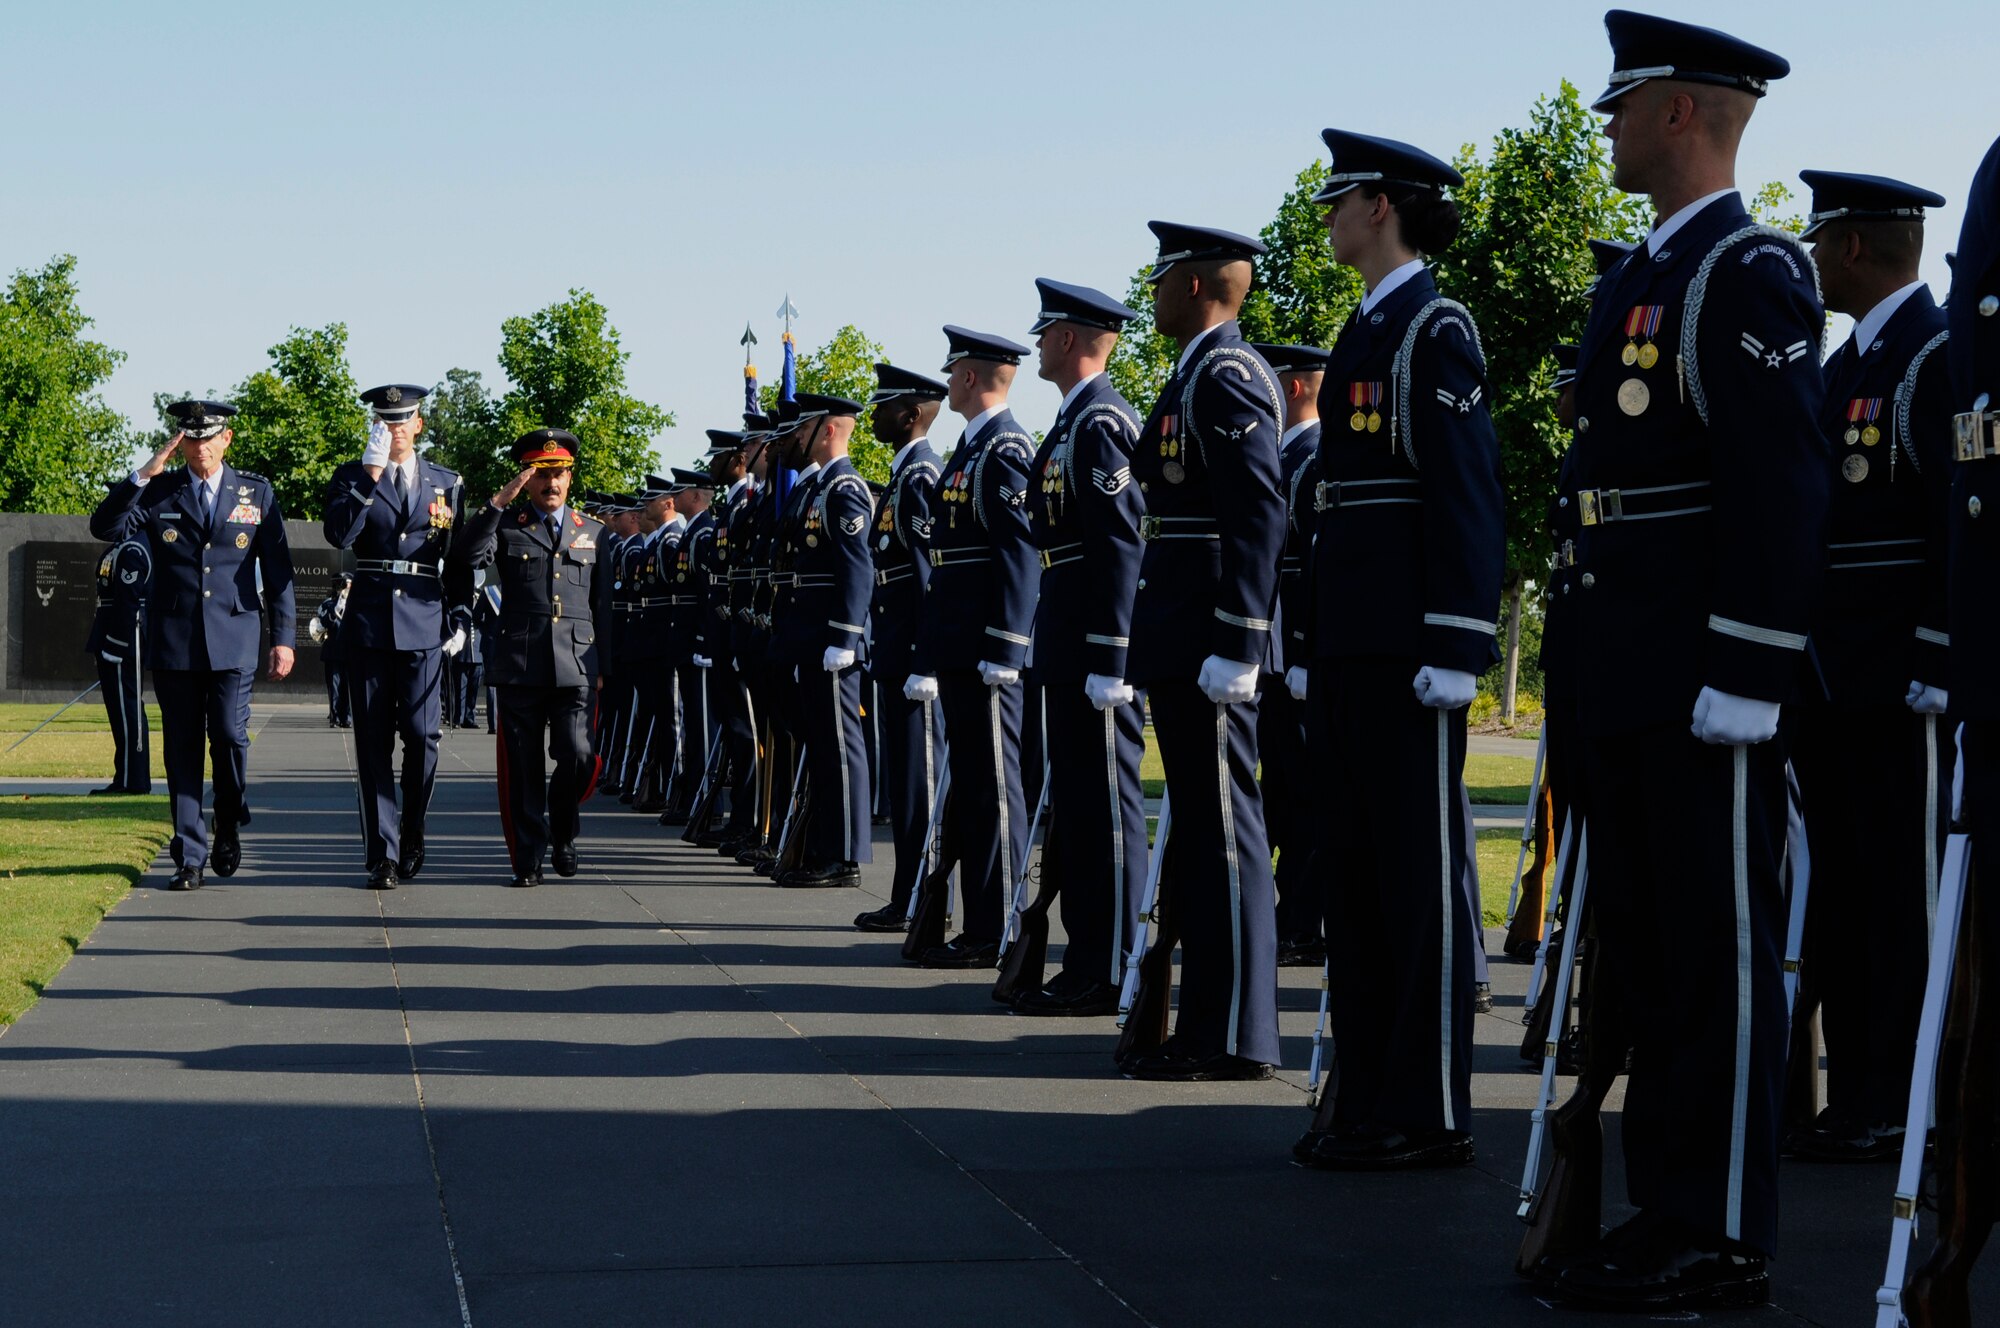 Gen. Norton Schwartz, Air Force chief of staff, and Maj. Gen. Mohammad Dawran, commander Afghan National Army Air Corps, are led by 1st Lt. Chad Frey, United States Air Force Honor Guard, during an inspection of the troops as part of an arrival ceremony held in General Dawrans honor July 14 at the Air Force Memorial in Arlington, Va. The arrival ceremony welcomed General Dawran to the United States and started his nationwide tour of Air Force installations. (U.S. Air Force photo by Staff Sgt. Dan DeCook)